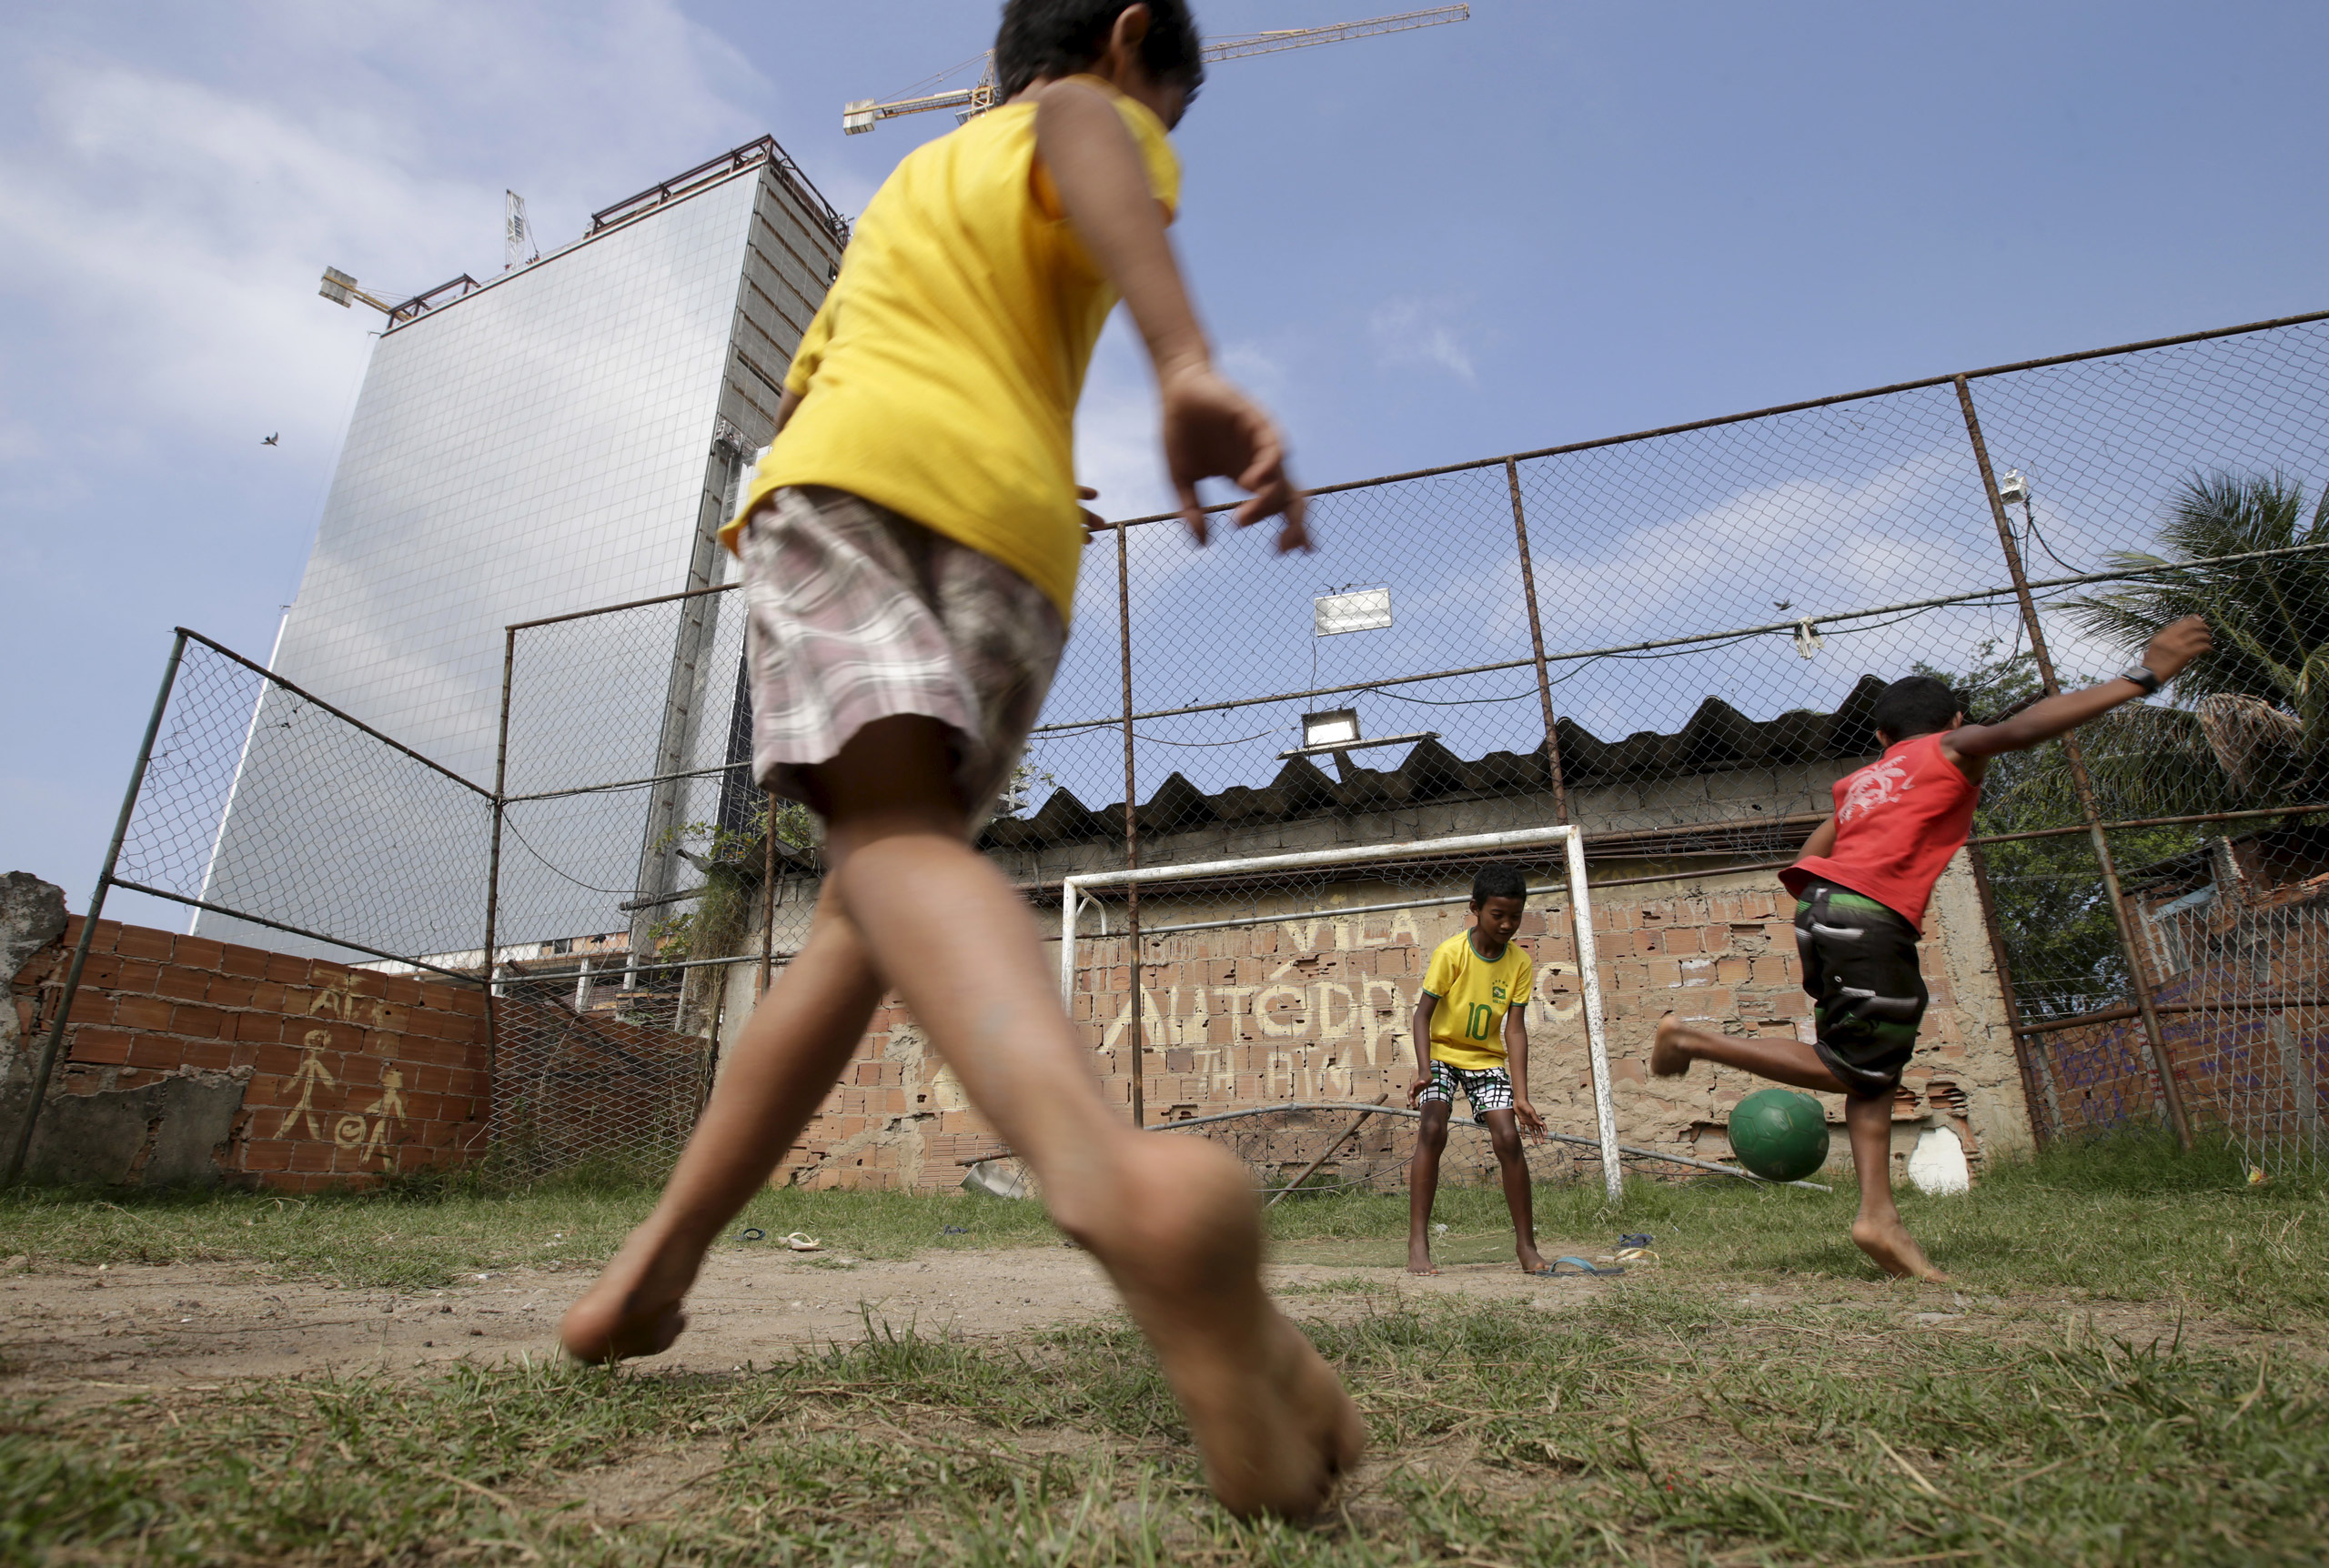 Children play soccer in the Vila Autodromo slum in Rio de Janeiro, Brazil, July 28, 2015. As sports arenas rise up around them and neighbours' houses are demolished, around 50 families remain in Vila Autodromo, a favela bordering the Olympic Park in Rio de Janeiro. About half of those refuse to leave the favela, which they describe as "paradise" because of a lack of violence compared with poor areas elsewhere in the city. With a year until the Games come to Brazil, over 90 percent of residents have already left after accepting compensation. The holdouts, despite violent run-ins with police, vow to fight eviction whatever the cost. Living in a ghost town with sporadic access to water and electricity, the families have become a symbol against the use of the Olympic Games to modernize Rio, a move critics say is only benefiting the rich. REUTERS/Ricardo Moraes TPX IMAGES OF THE DAYPICTURE 6 OF 28 FOR WIDER IMAGE STORY "FIGHTING OLYMPIC EVICTION IN RIO FAVELA" SEARCH "RICARDO PARADISE" FOR ALL IMAGES ‚Ä®      TPX IMAGES OF THE DAY      - RTX1Q0DR